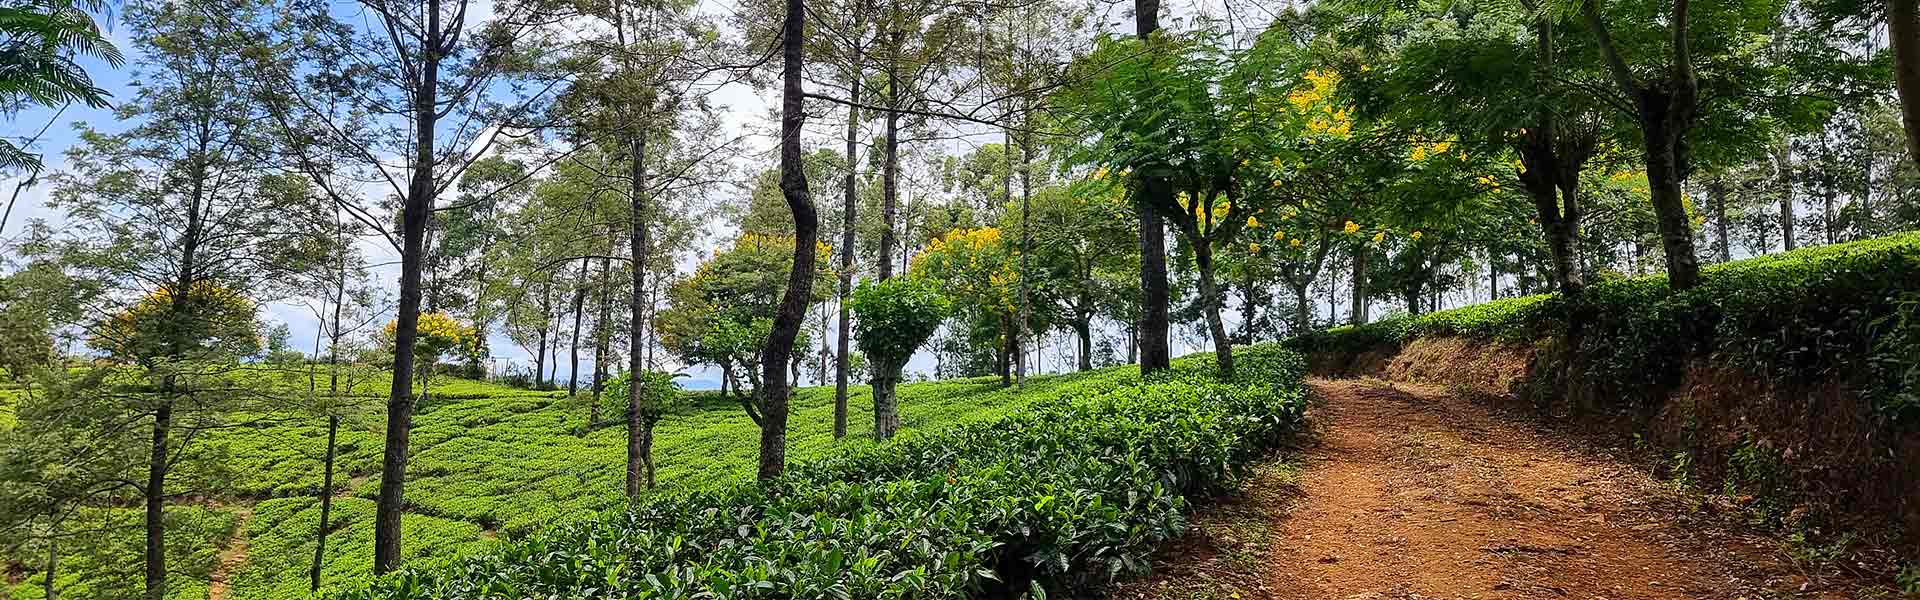 Sri Lanka's central highlands with tea plantation and a winding path leading into the hiking trail